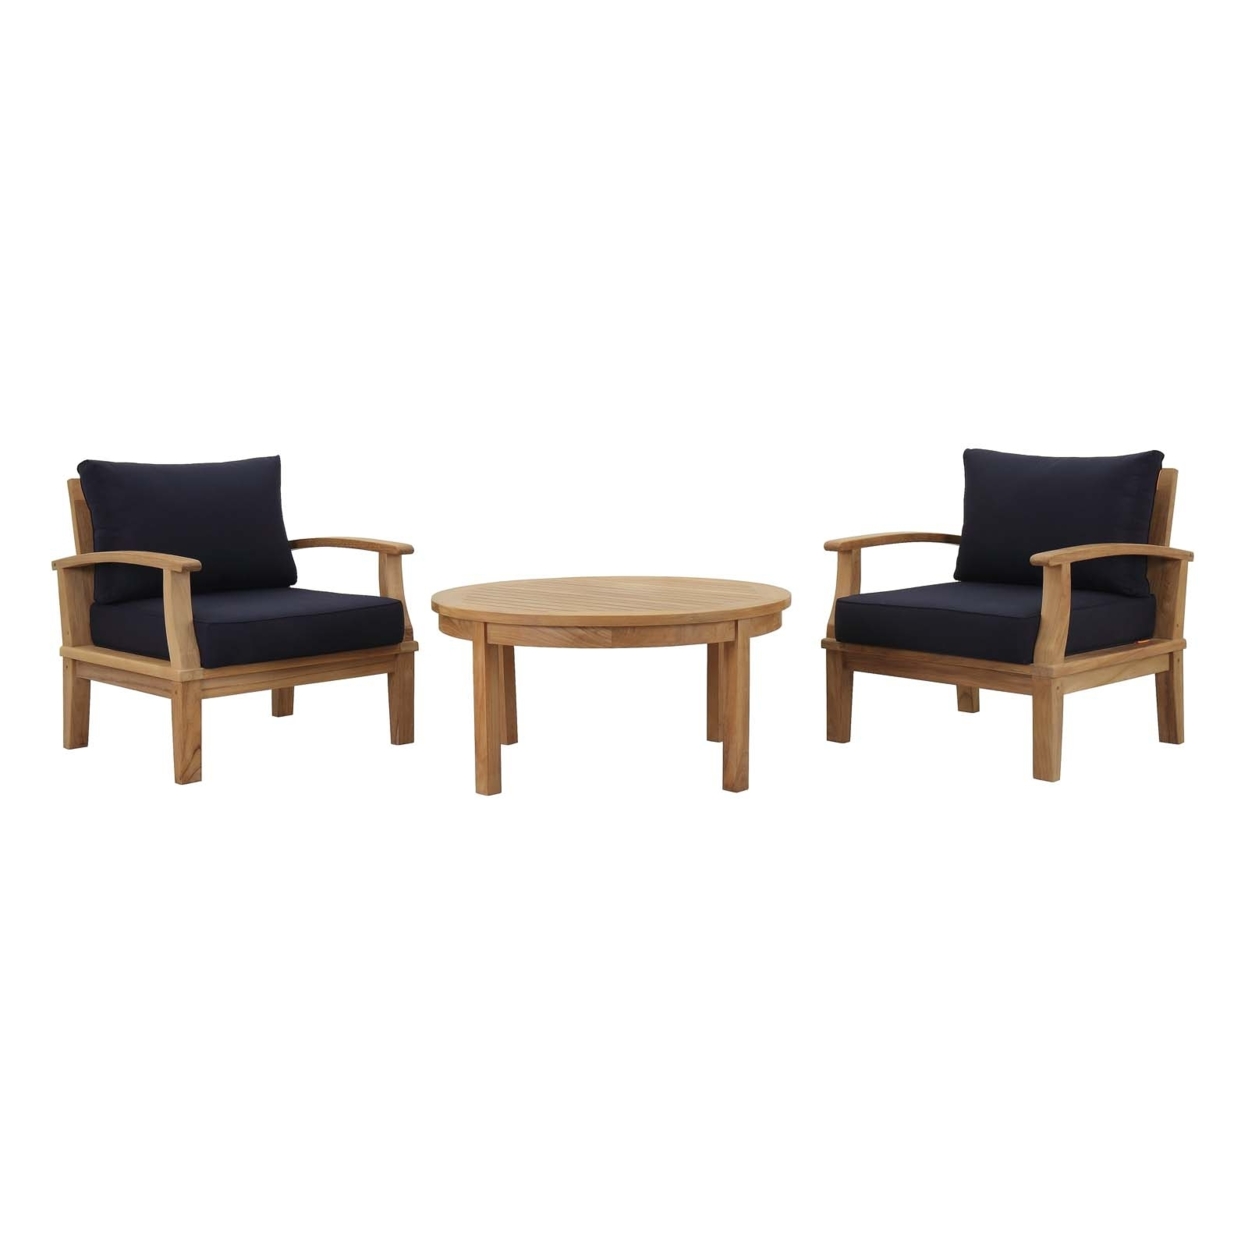 3 Piece Outdoor Patio Seating Set, Natural Teak Frame, Navy Blue Cushions